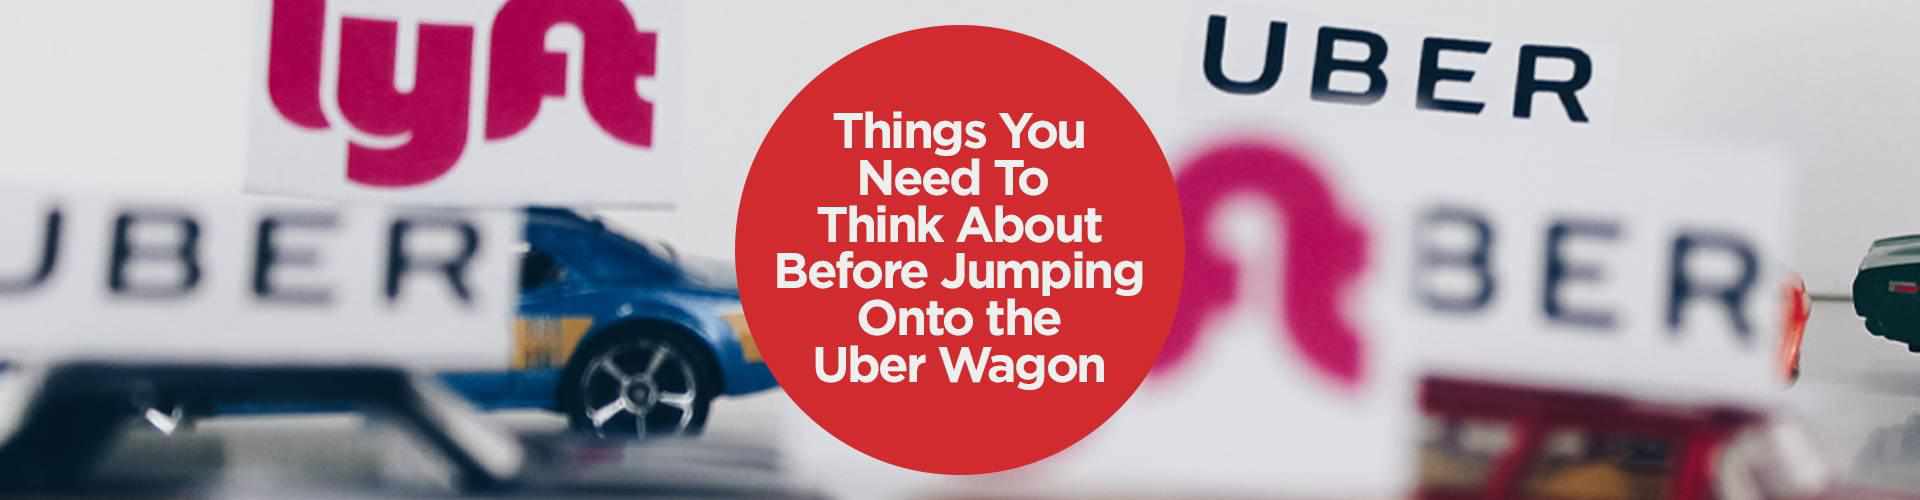 https://www.blackboxmycar.com/cdn/shop/articles/things-you-need-to-think-about-before-jumping-onto-the-uber-wagon-blackboxmycar_2419x630.jpg?v=1680305193